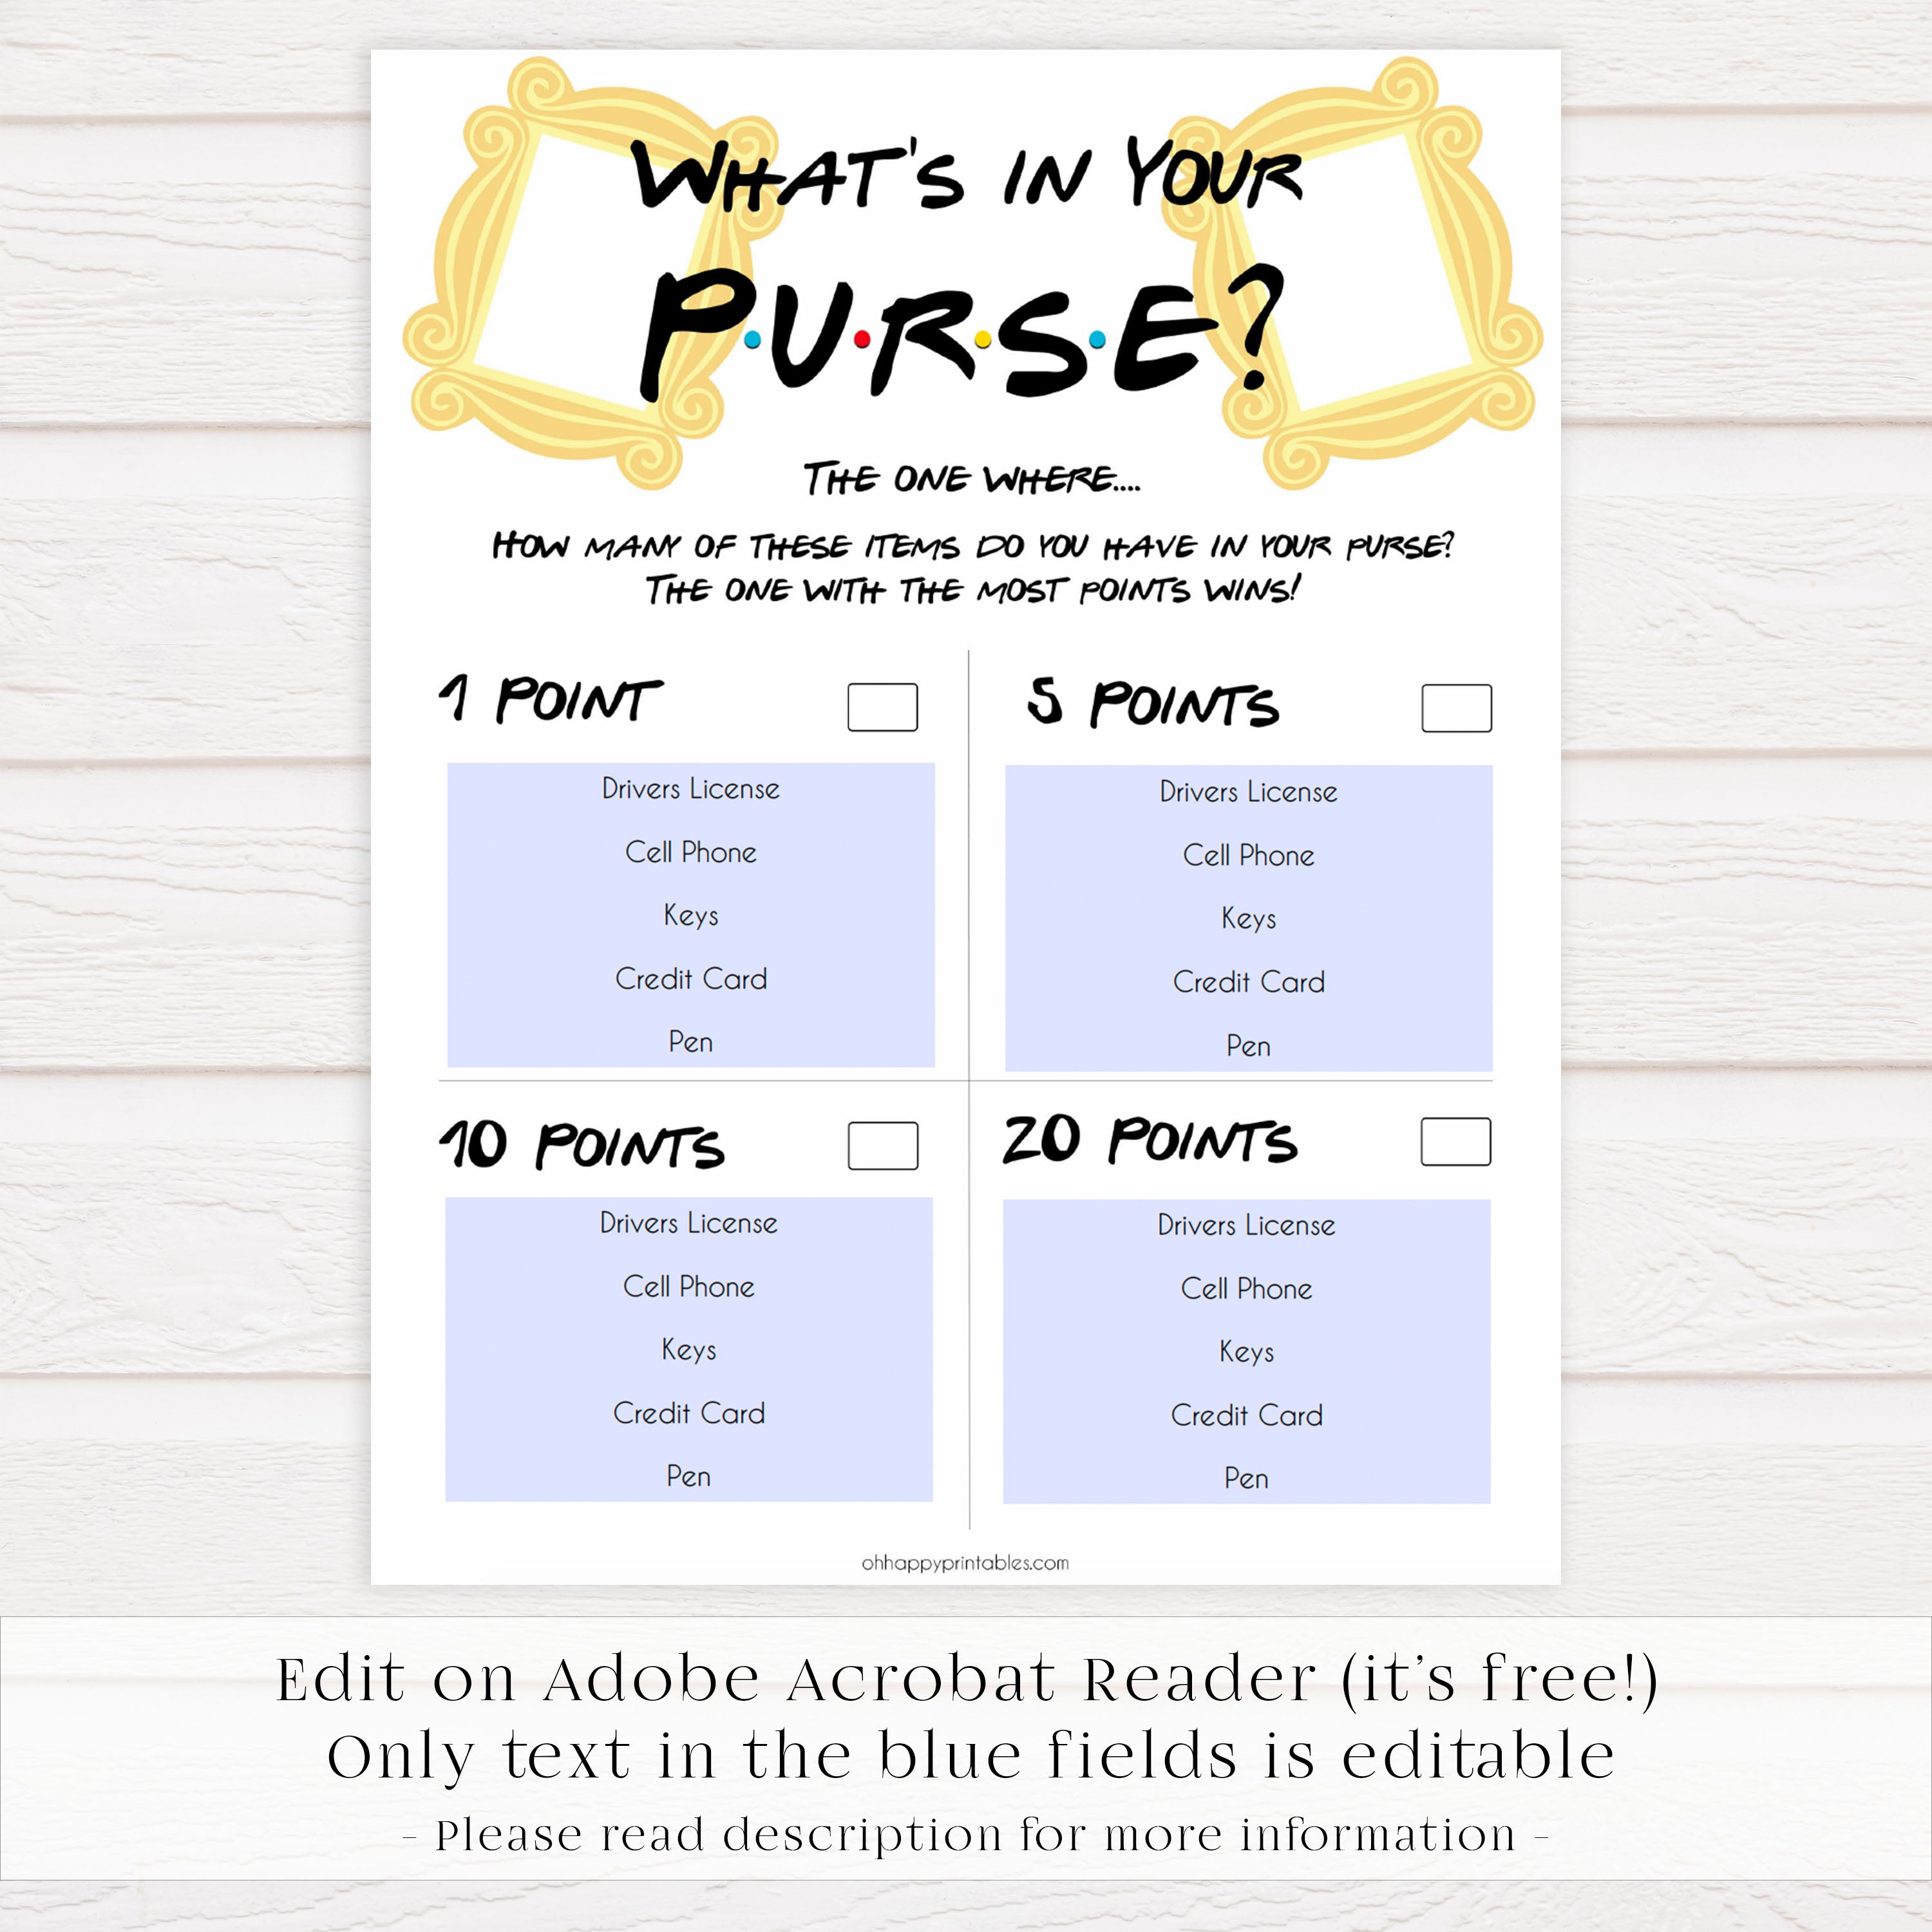 whats in your purse, bridal whats in your purse game, Printable bridal shower games, friends bridal shower, friends bridal shower games, fun bridal shower games, bridal shower game ideas, friends bridal shower